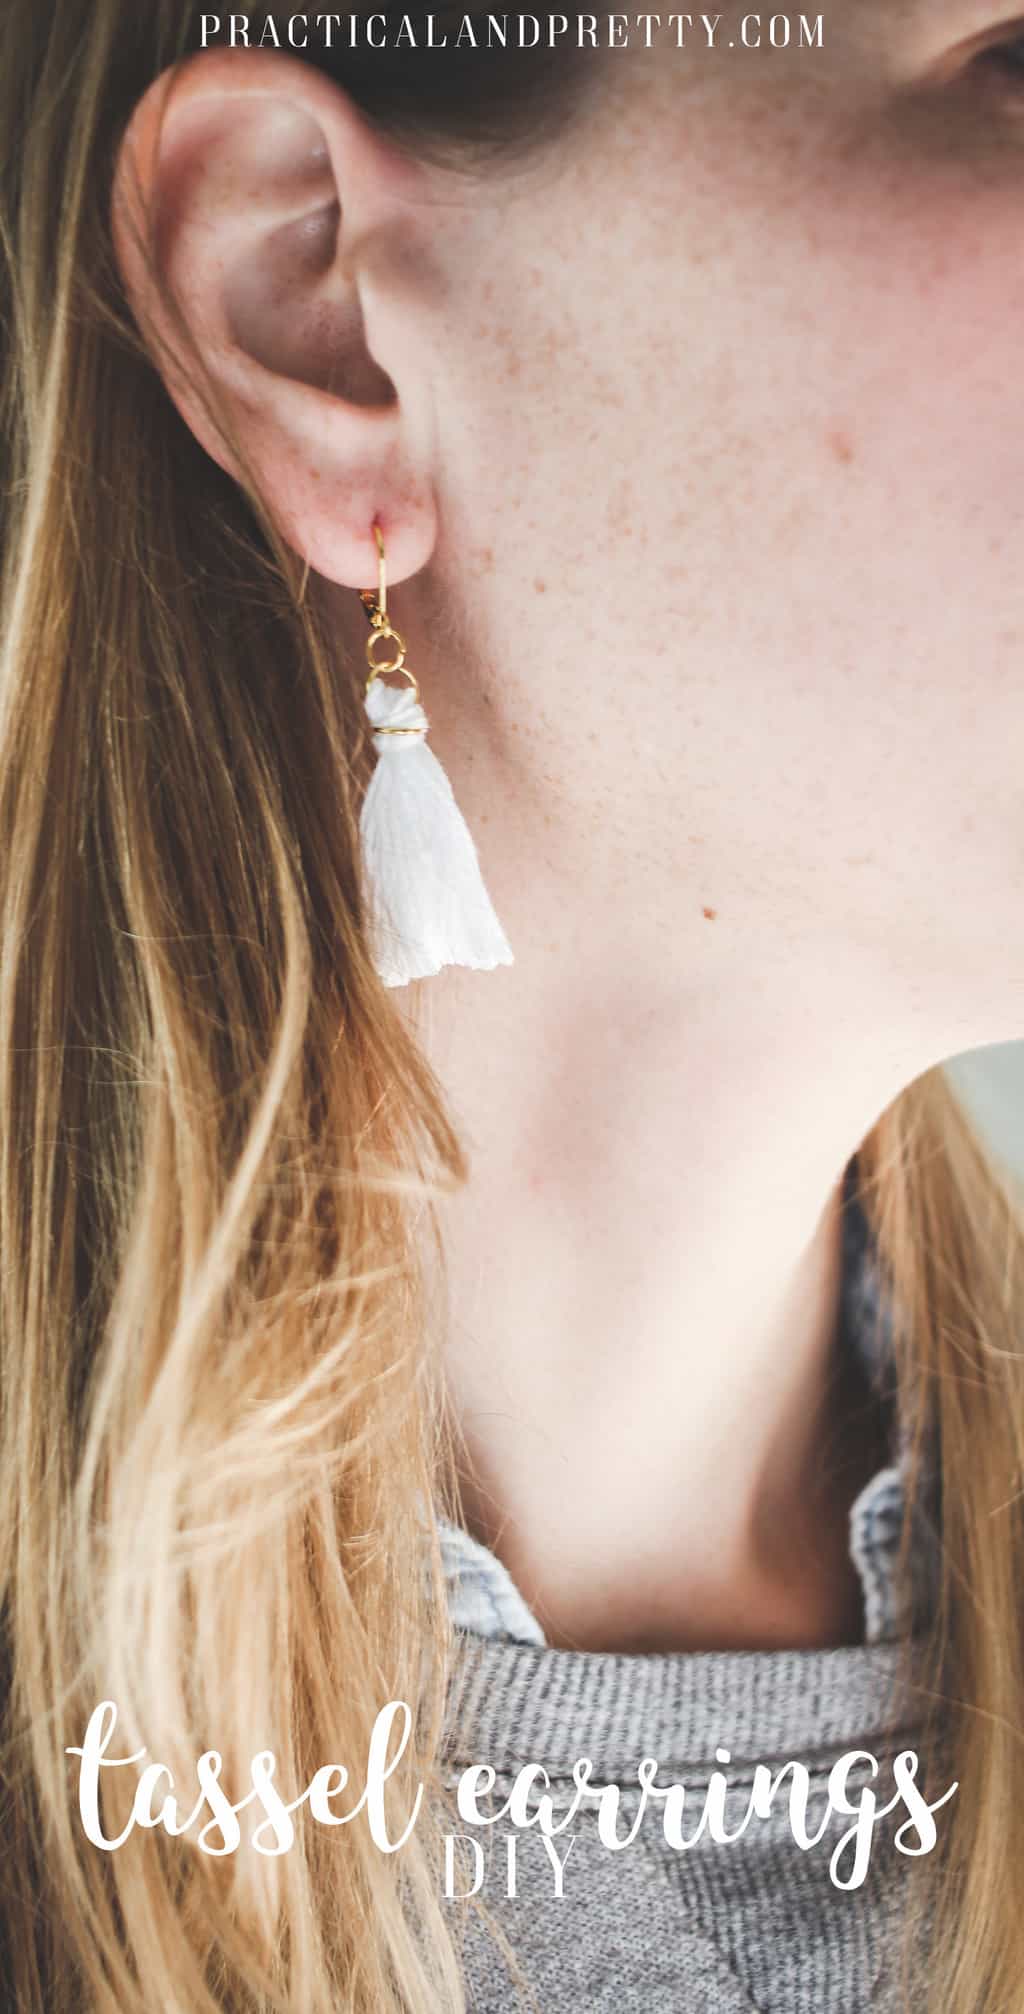 Don't splurge on tassel earrings when you can make a cute pair exactly how you'd like them!